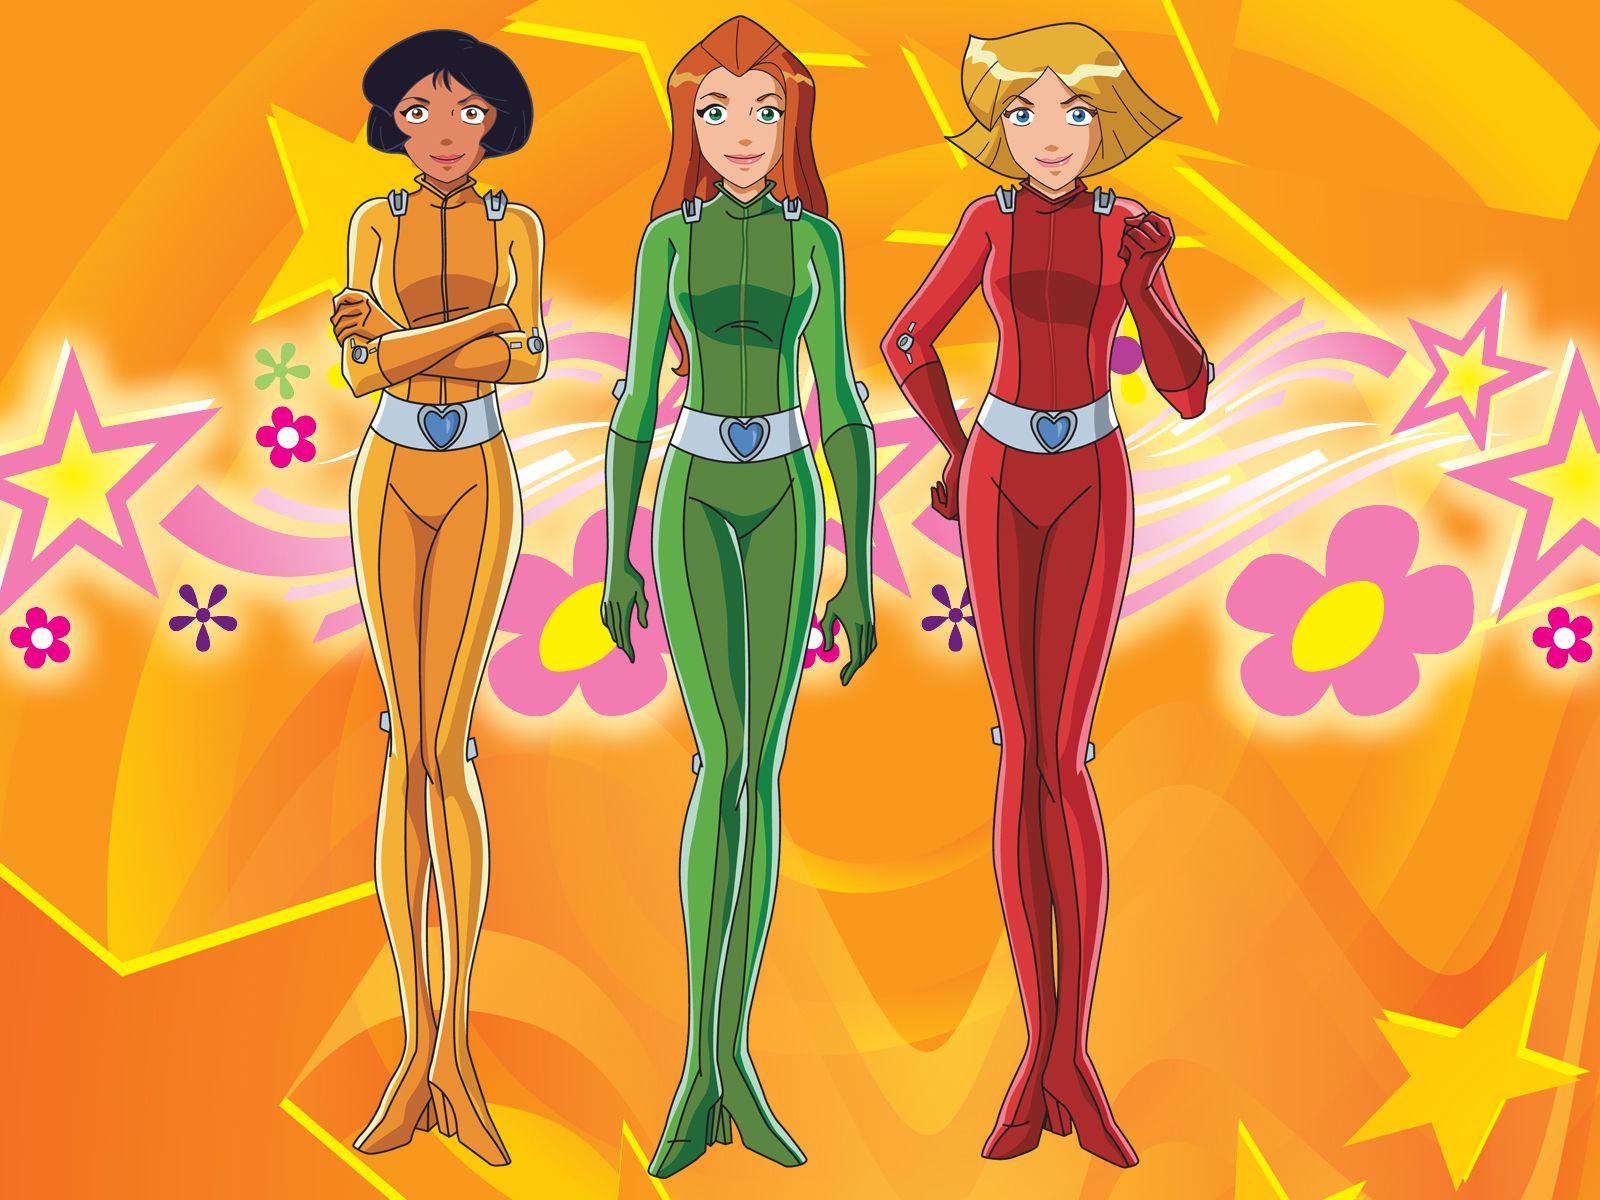 Totally Spies wallpapers and images - wallpapers, pictures, photos